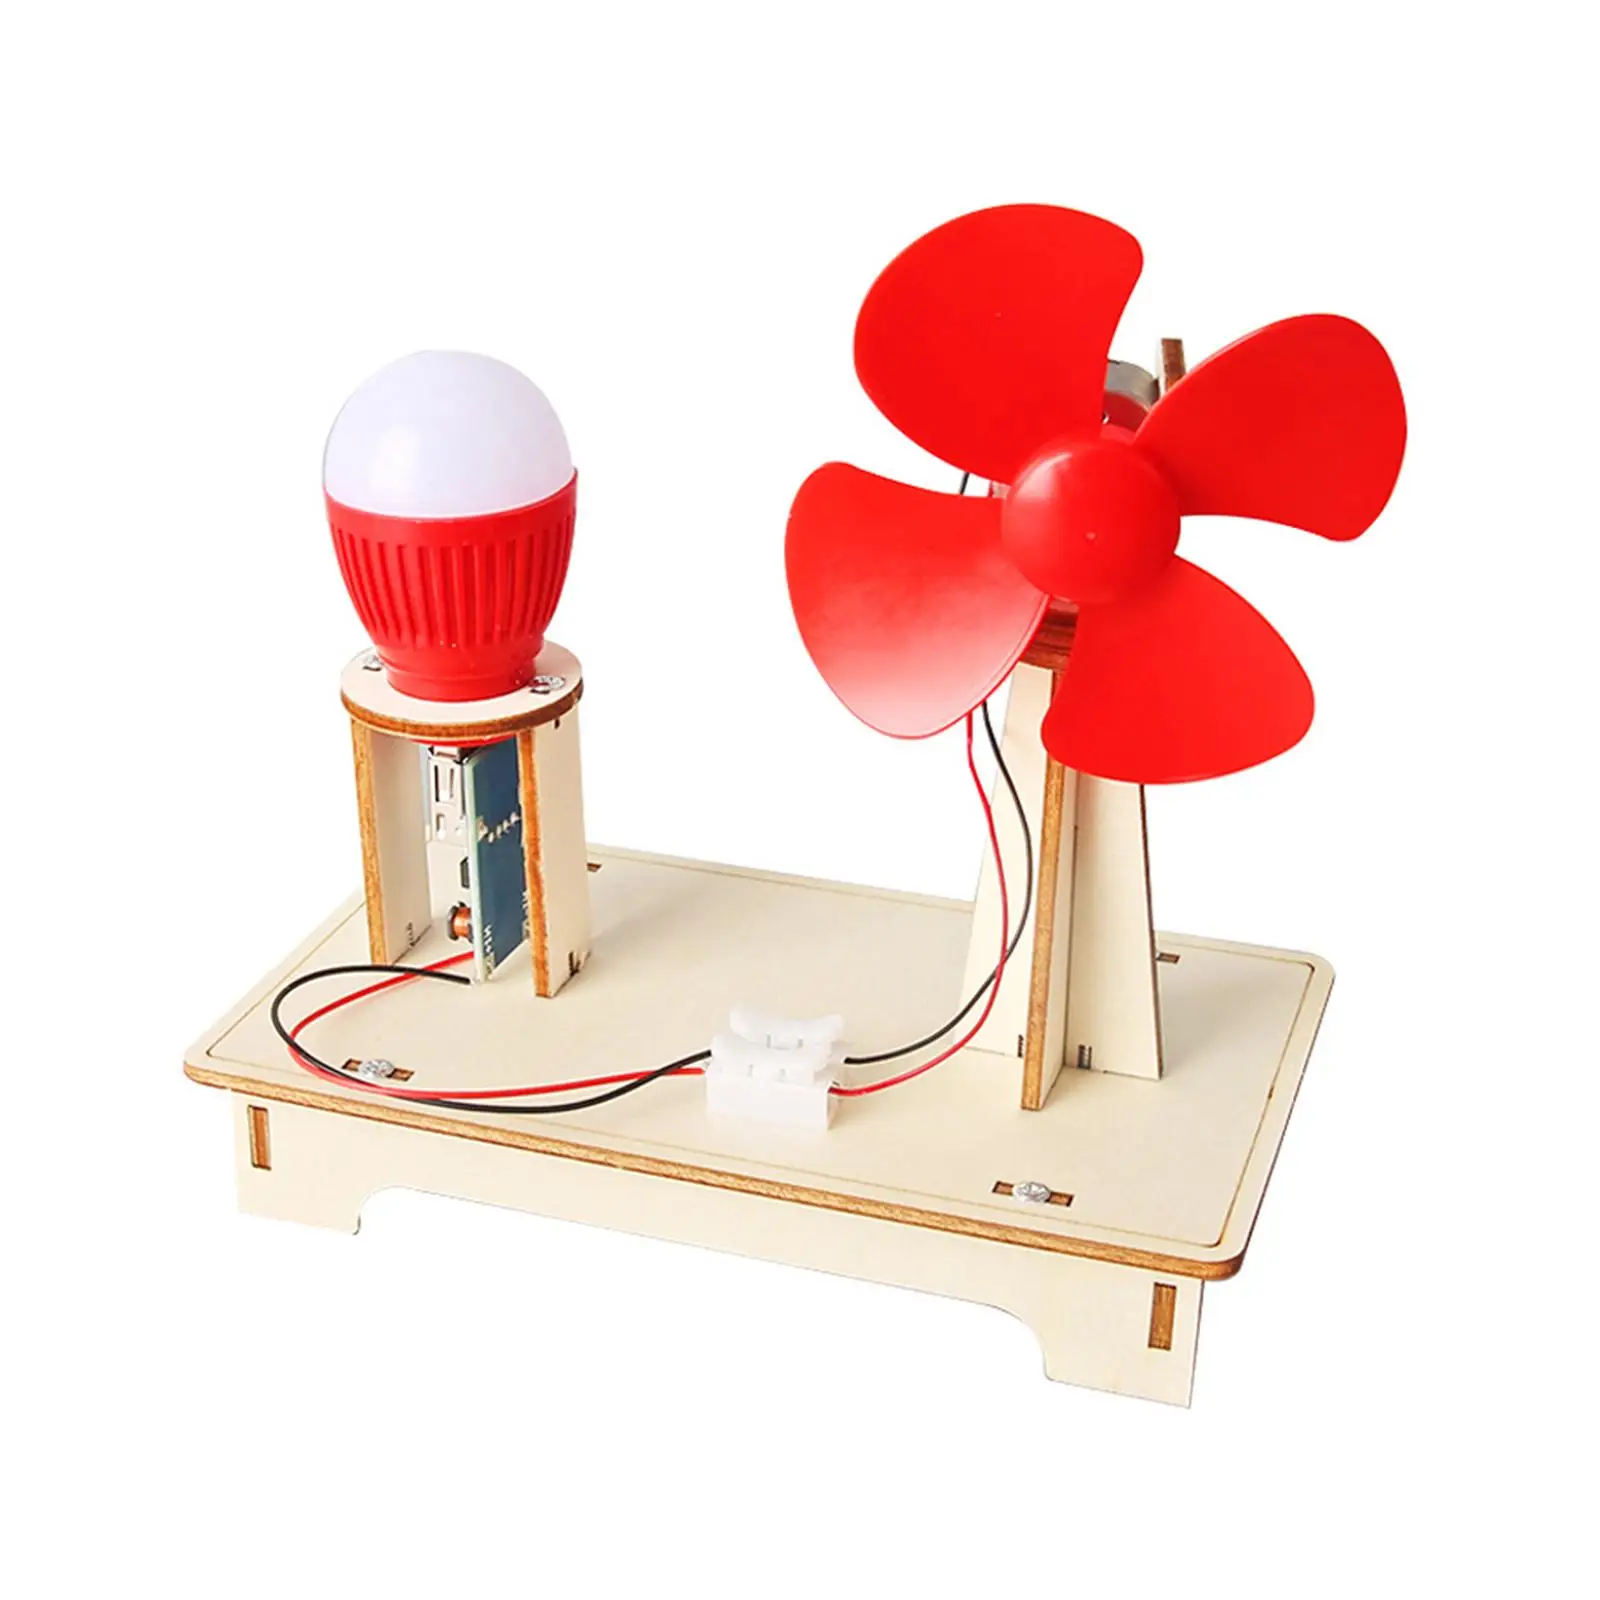 

DIY Educational Model Kit Toys Wind Turbines Homeschool Projects Experiment Toy Science Experiments DIY Kits for Girls Boys Kids